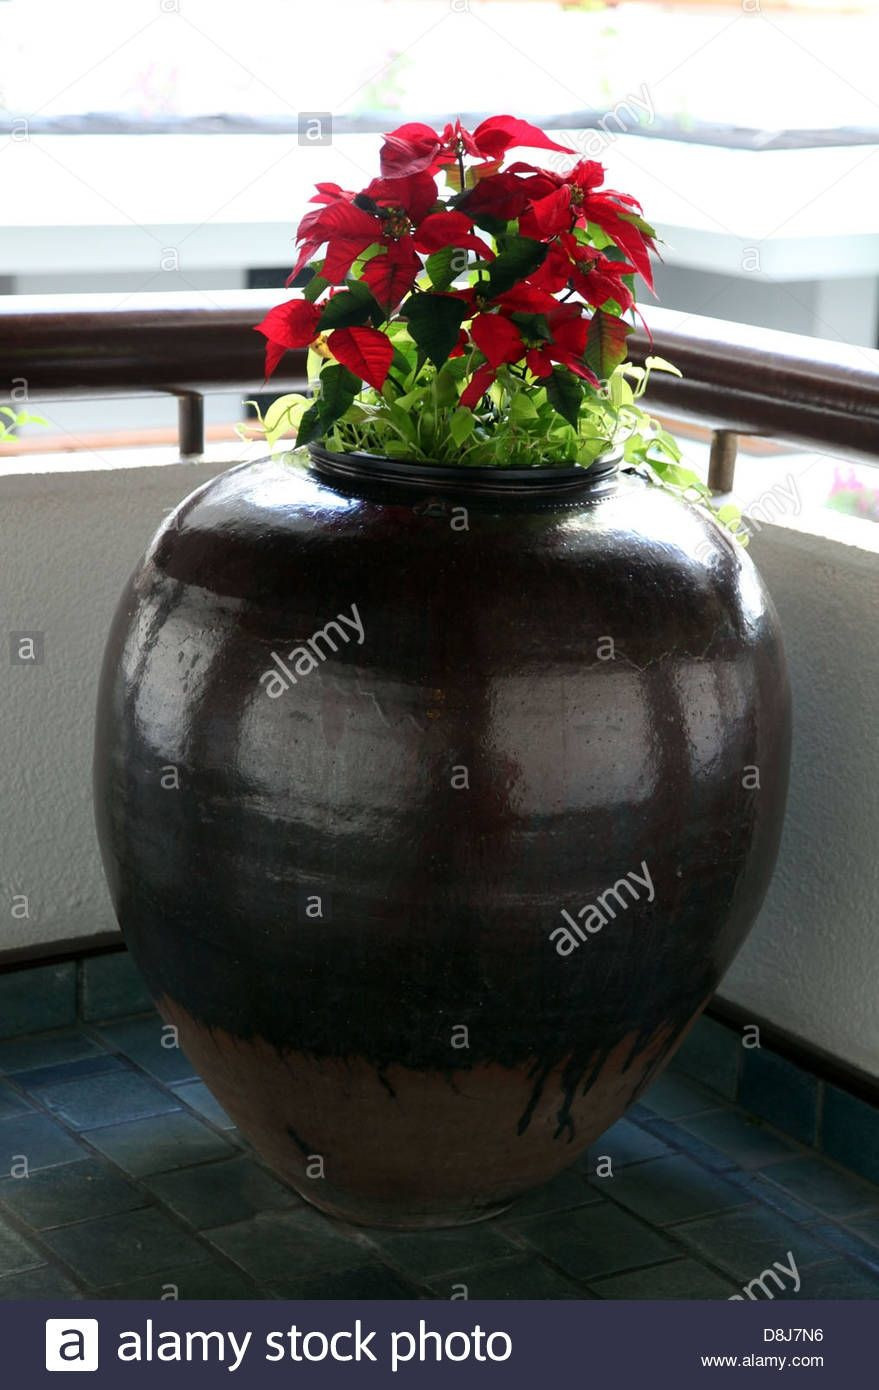 30 Perfect Stony Creek Vases 2024 free download stony creek vases of wide glass vase image paint a picture luxury h vases paint vase i 0d within wide glass vase pictures corner big flower vase vase pinterest of wide glass vase image paint